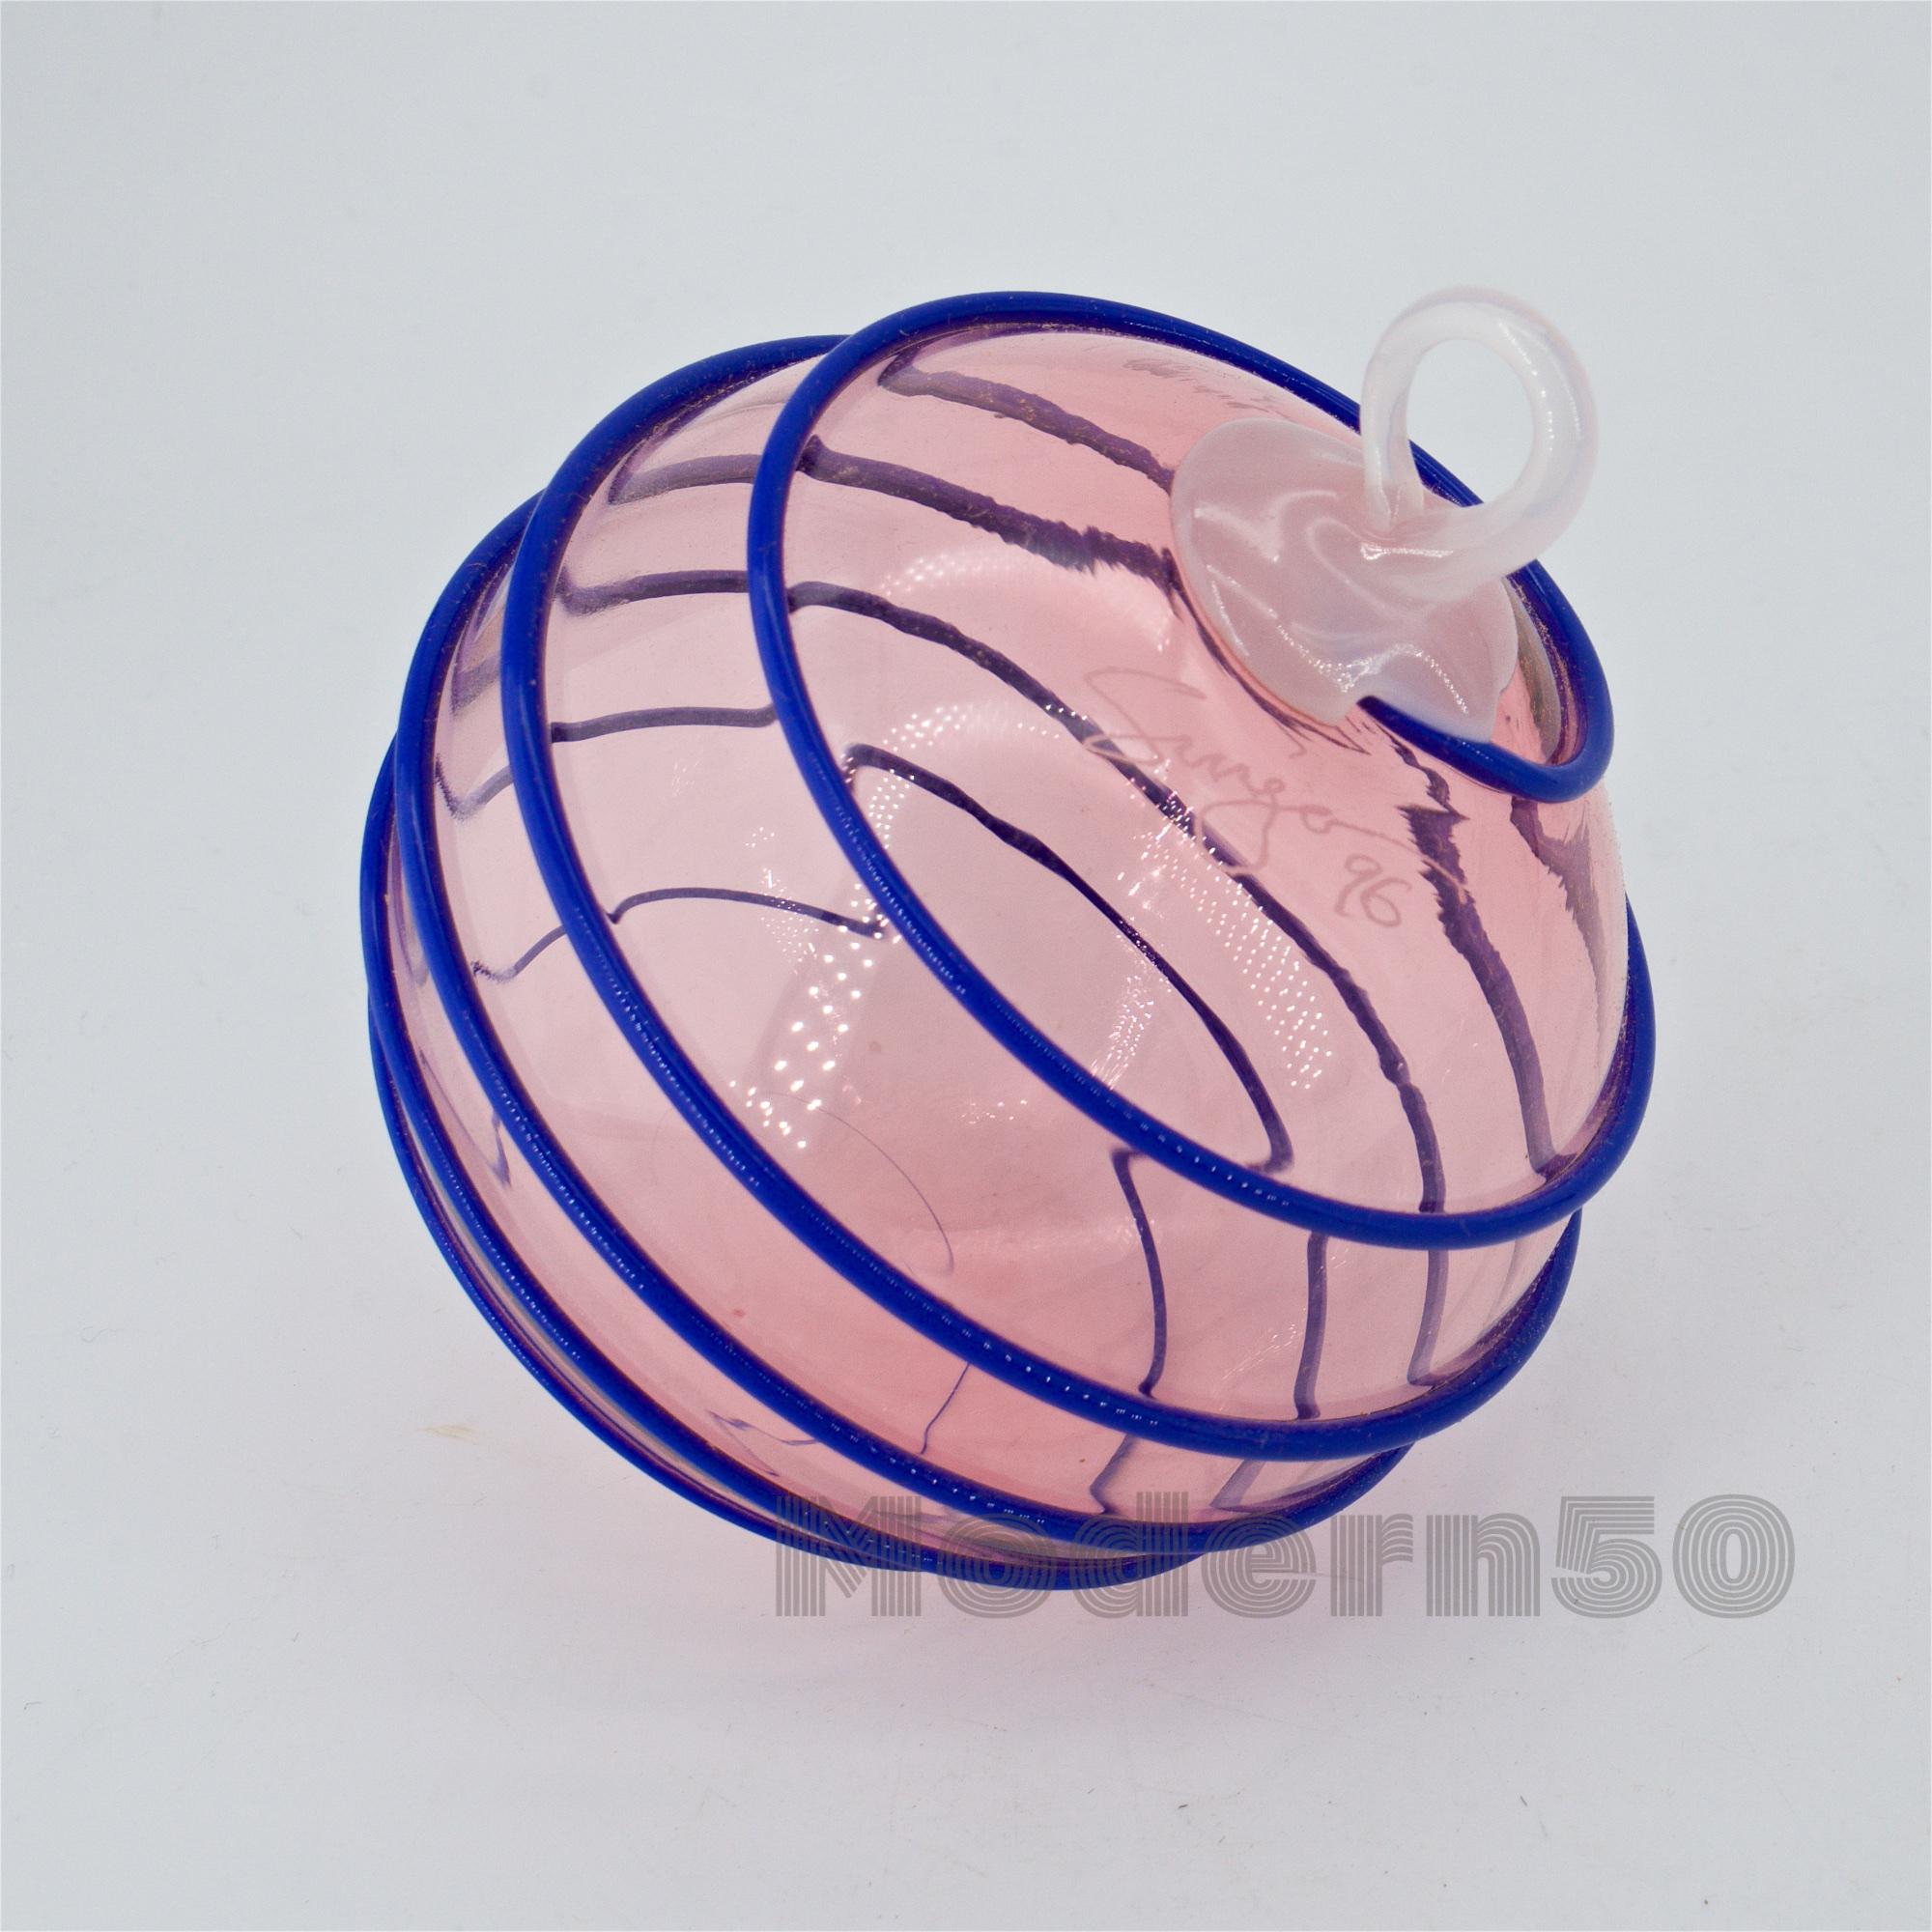 Hand-Crafted Sonja Blomdahl Nordstrom Christmas Ornament Art Glass Blown Orb Sphere Spiral For Sale